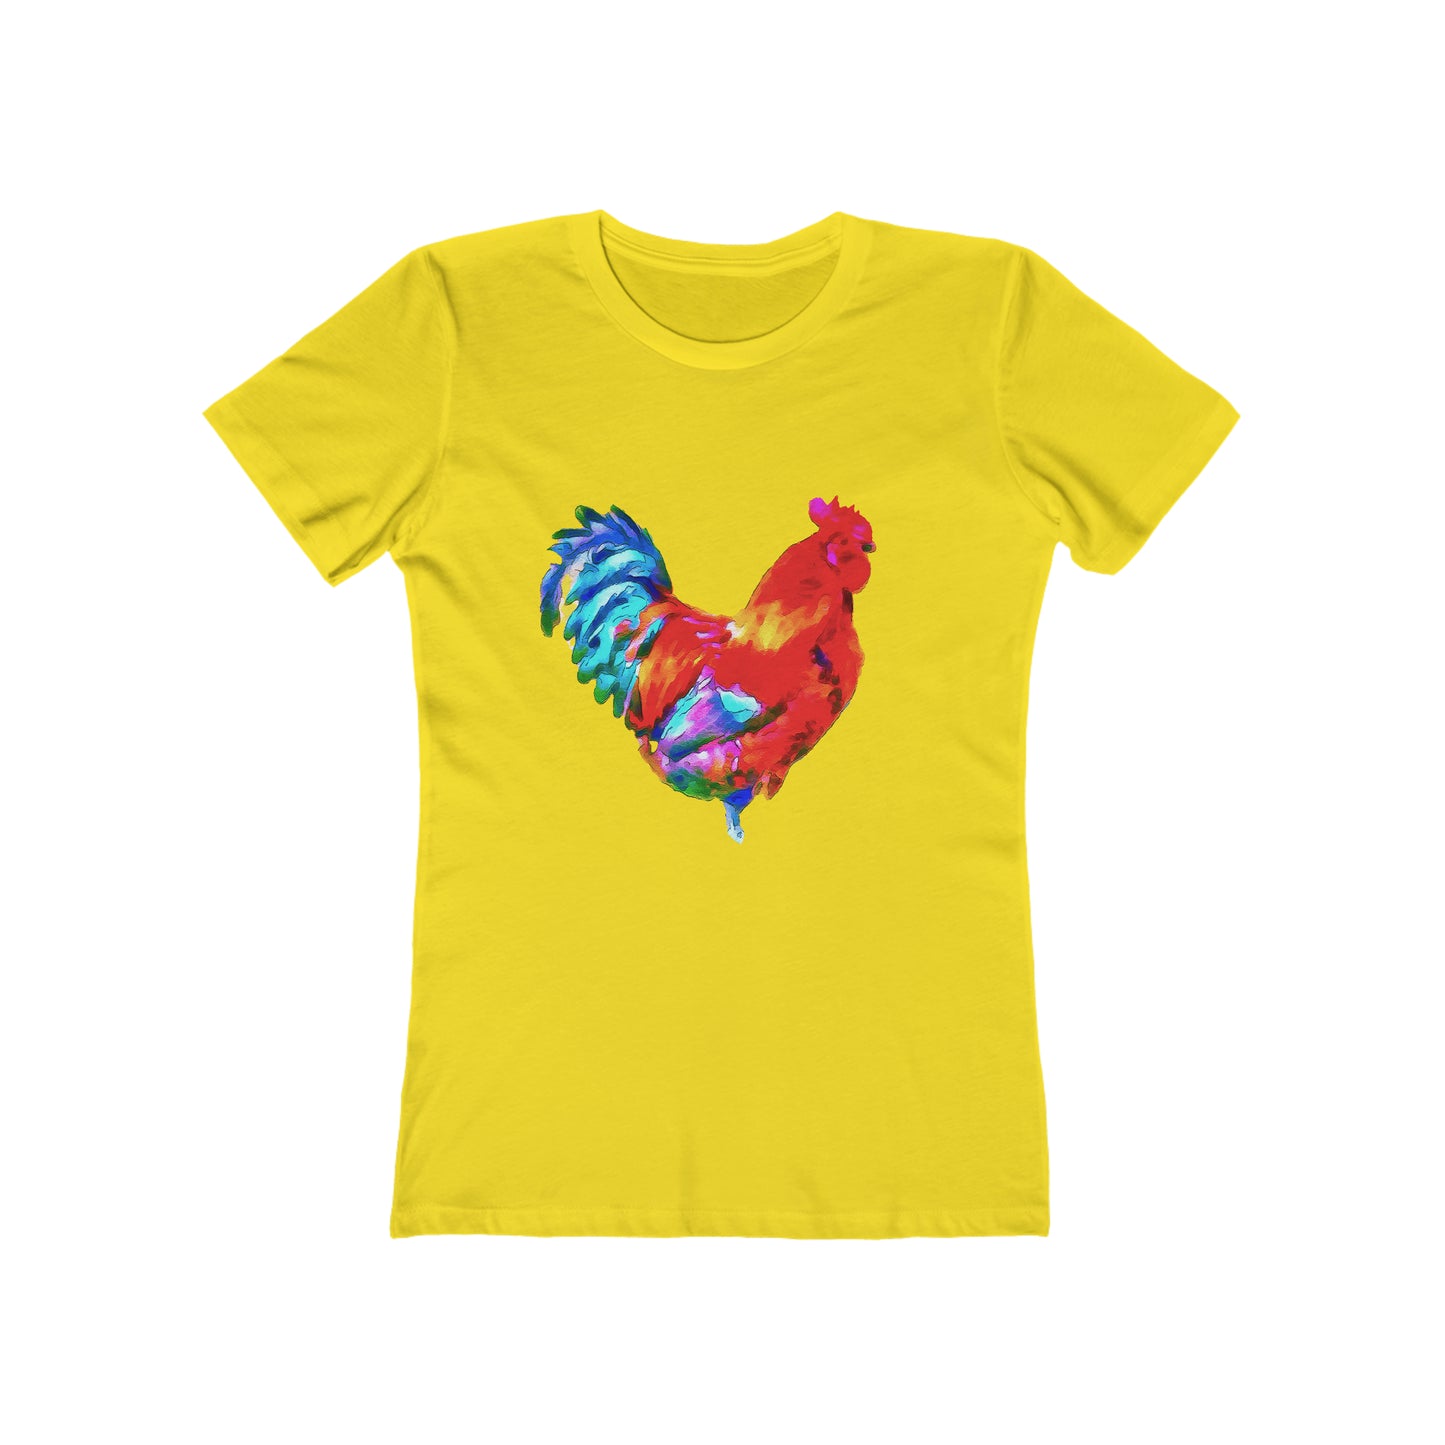 Rooster 'Craw' - Women's Slim Fit Ringspun Cotton T-Shirt